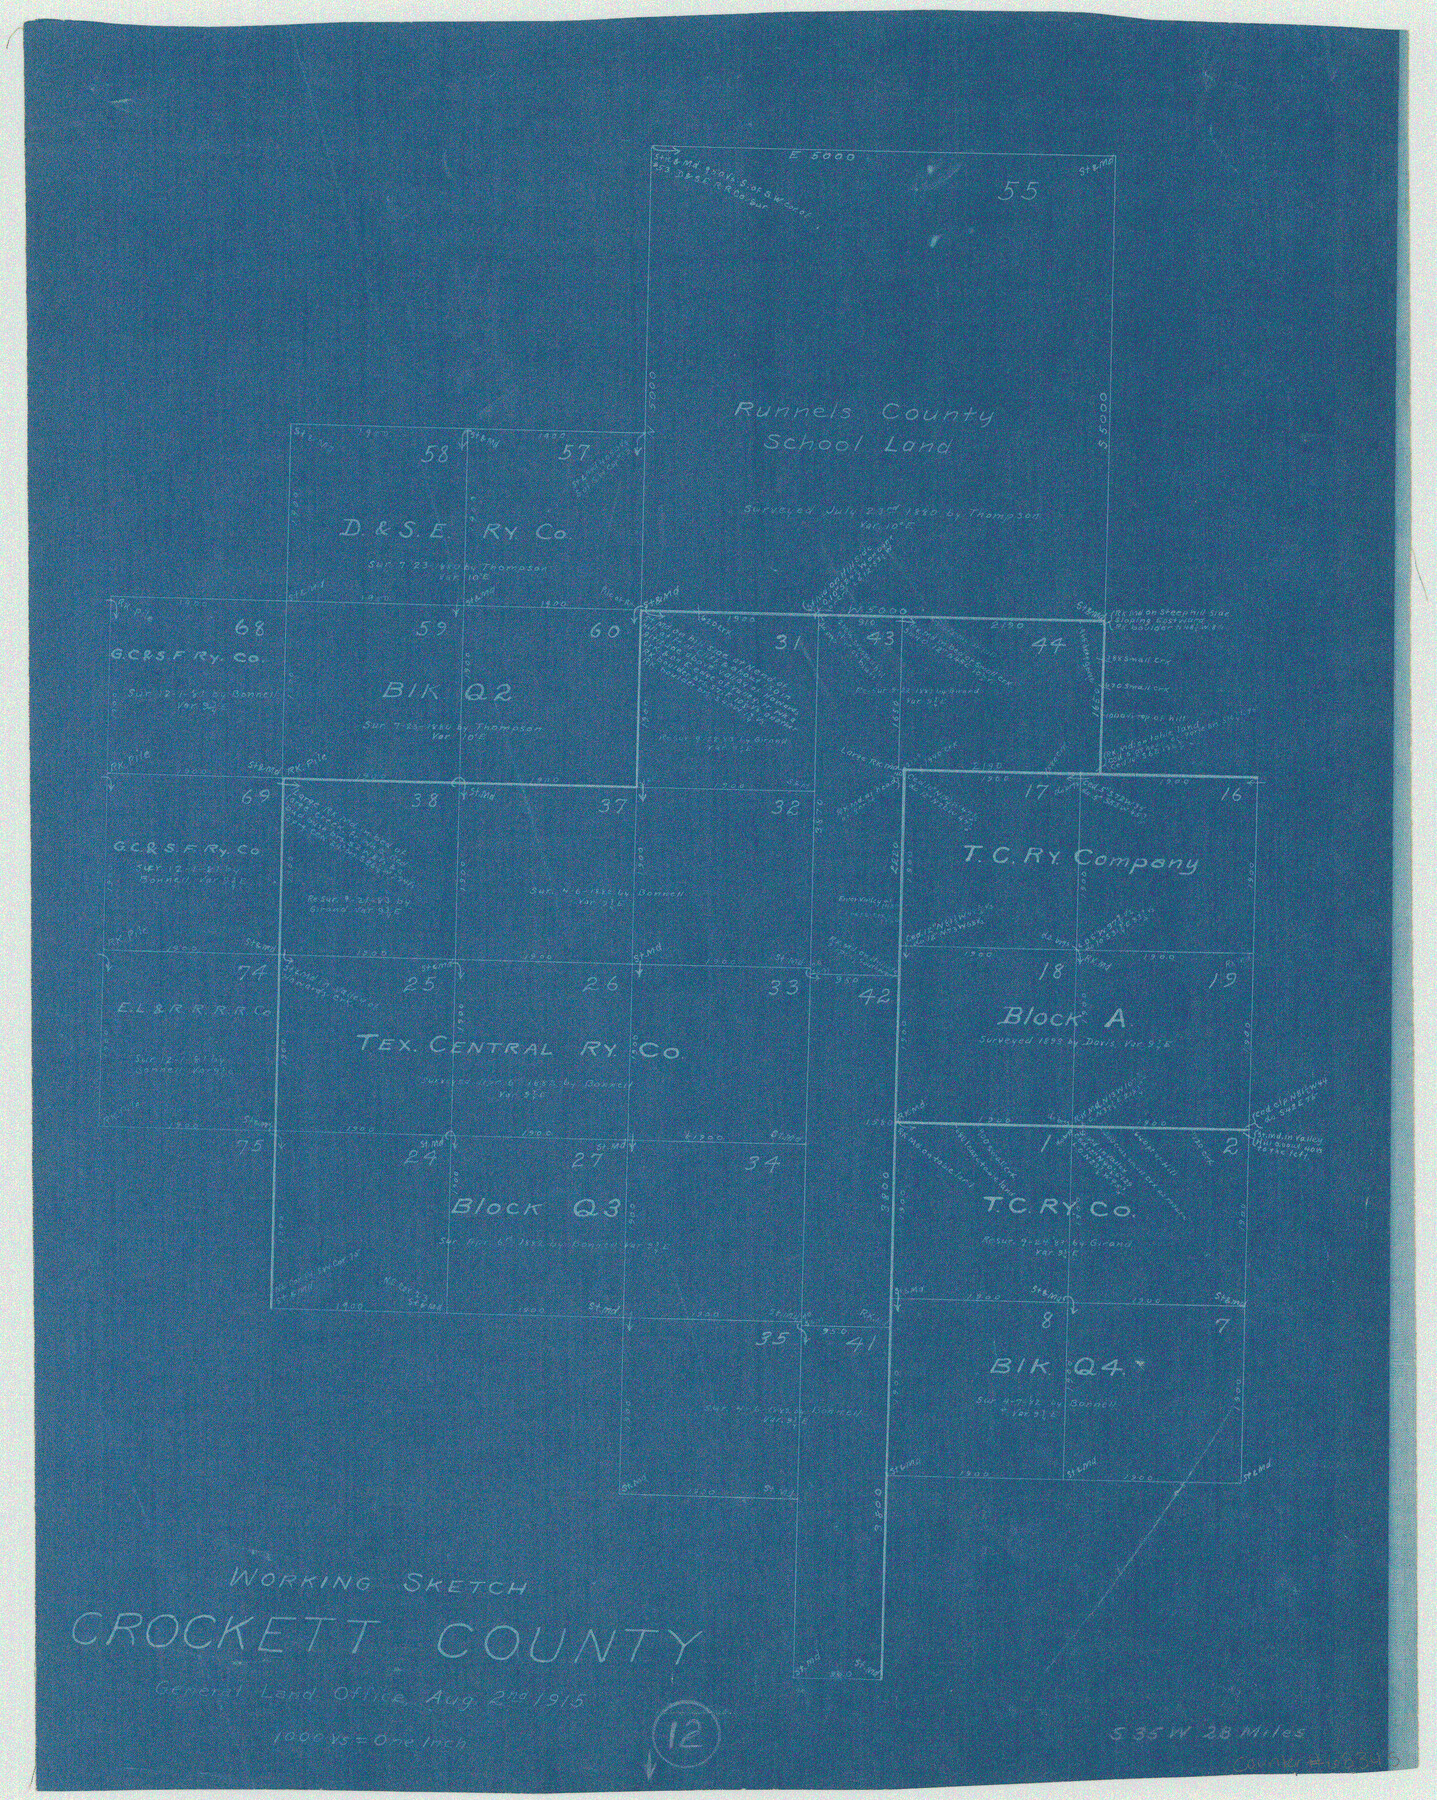 68345, Crockett County Working Sketch 12, General Map Collection